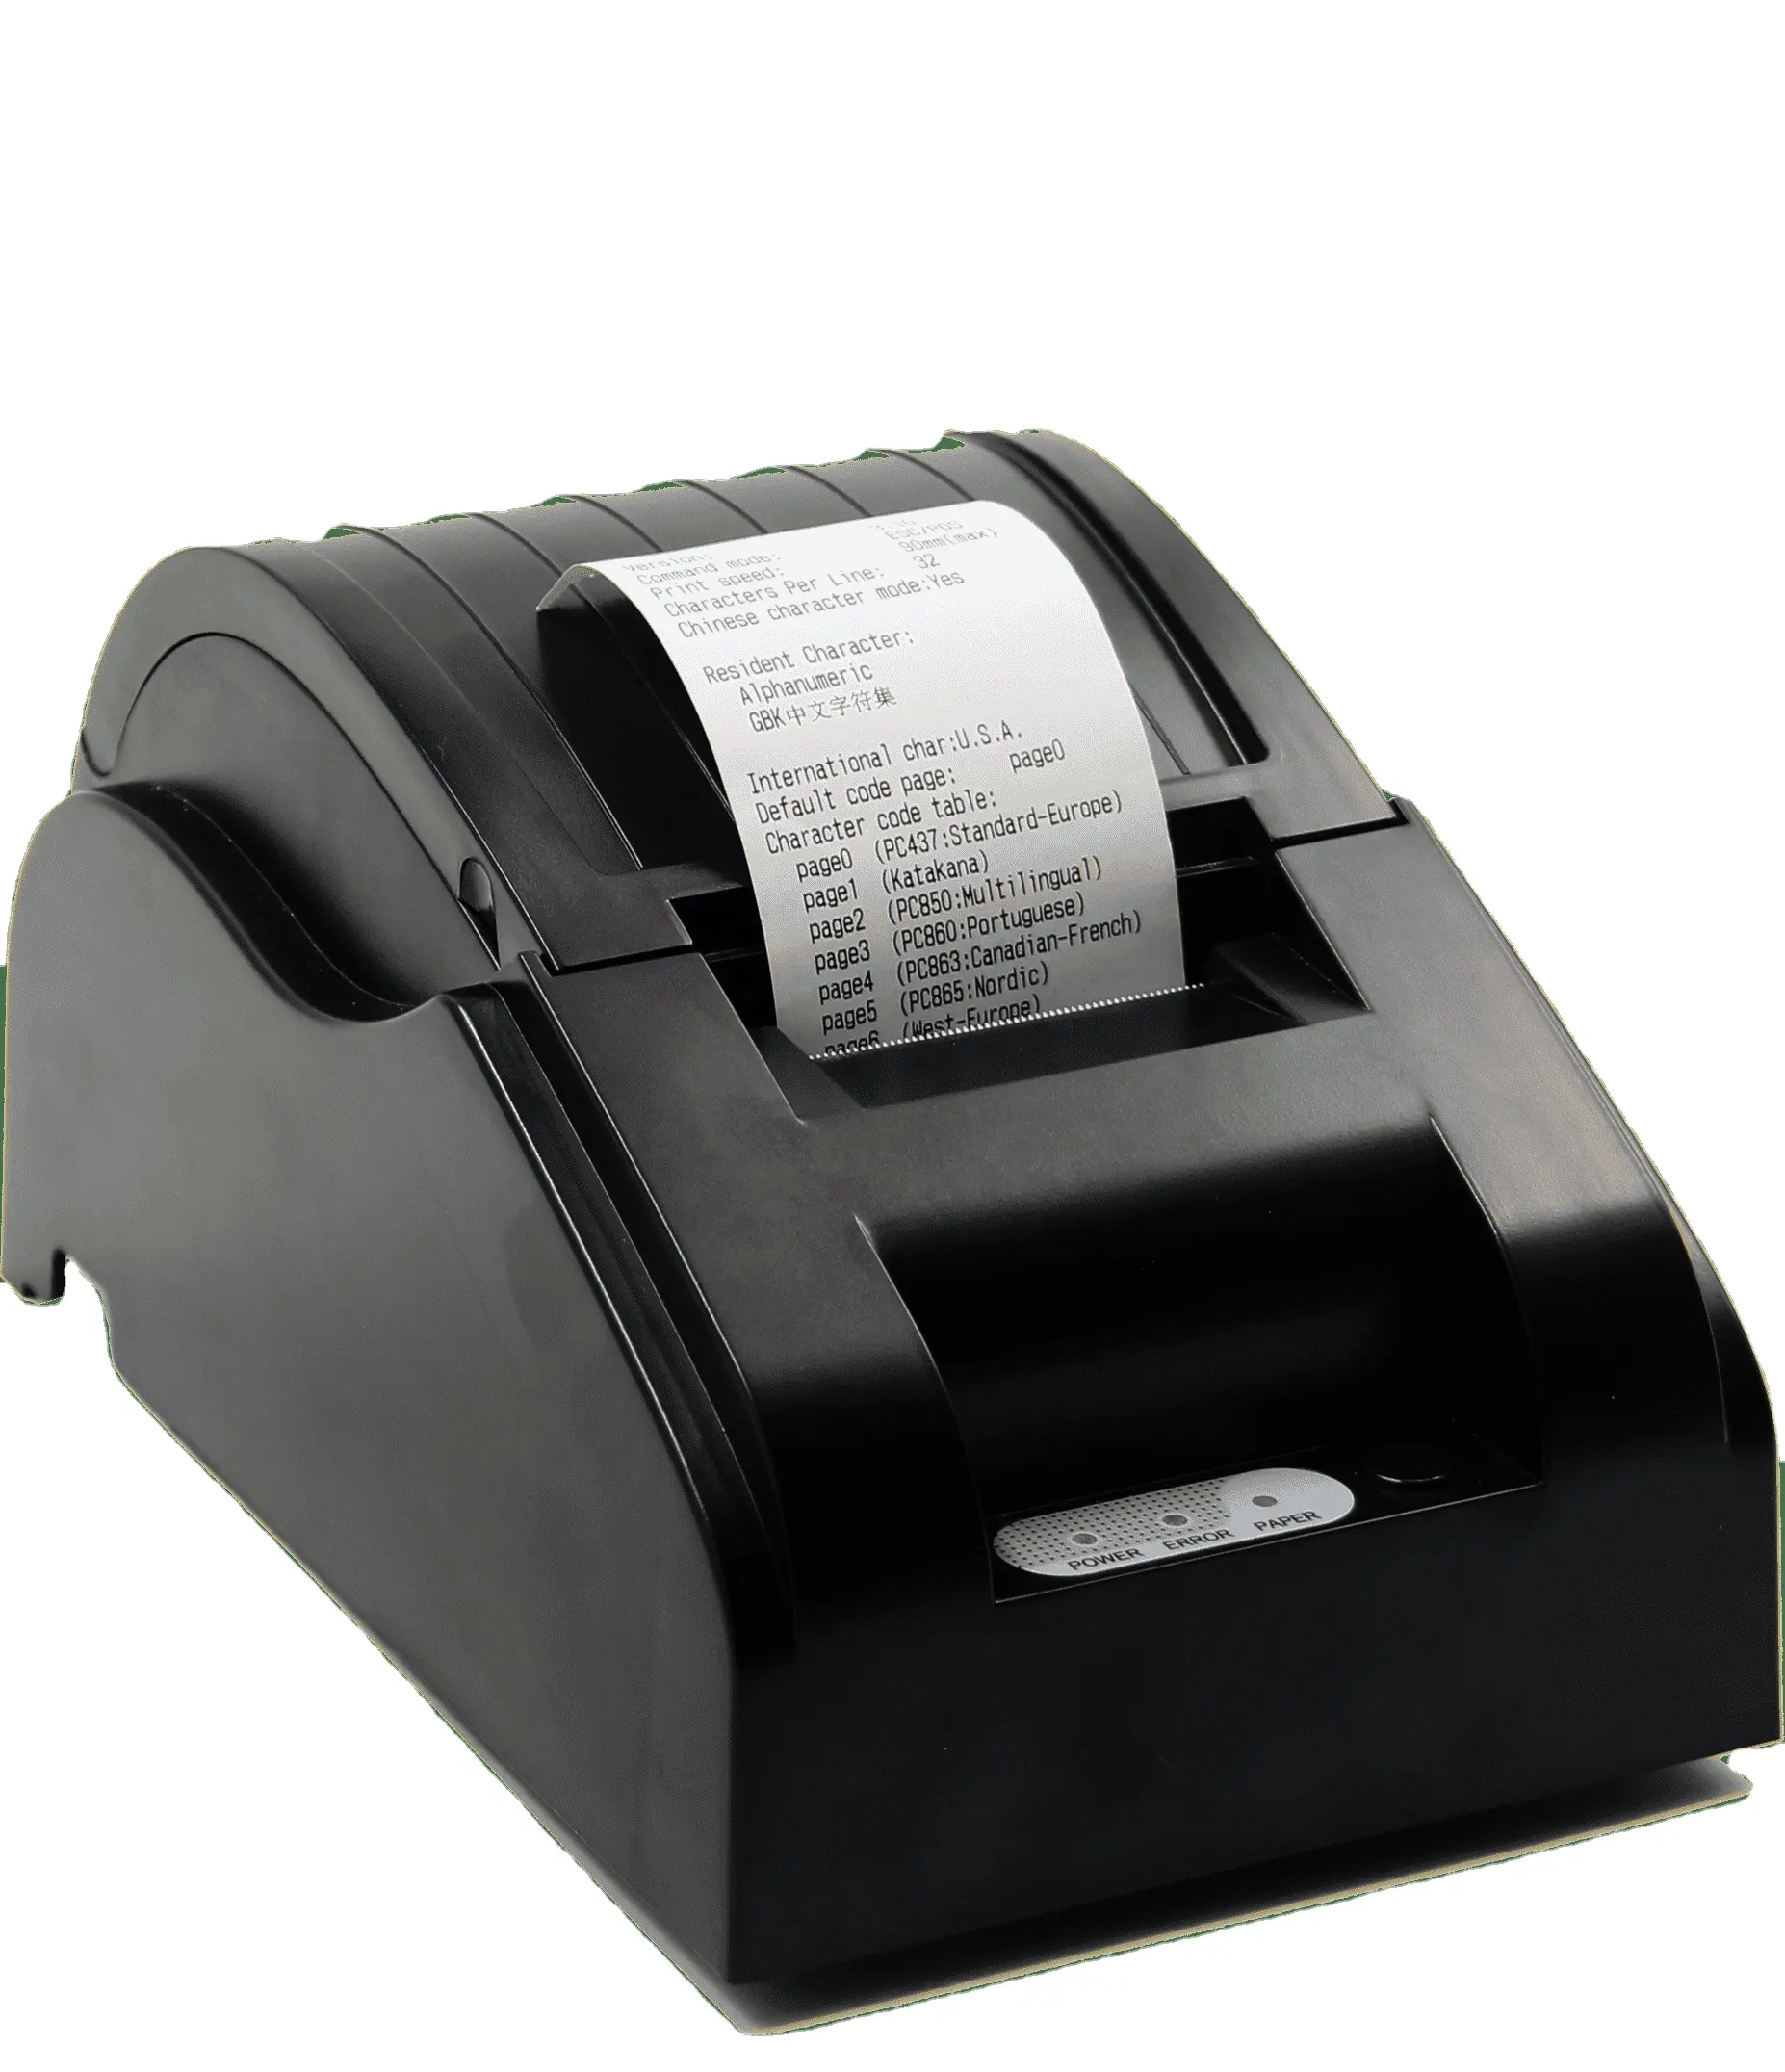 High Quality 5890 Portable Thermal Printer Fast Printing Speed User-Friendly Interface Compact Size